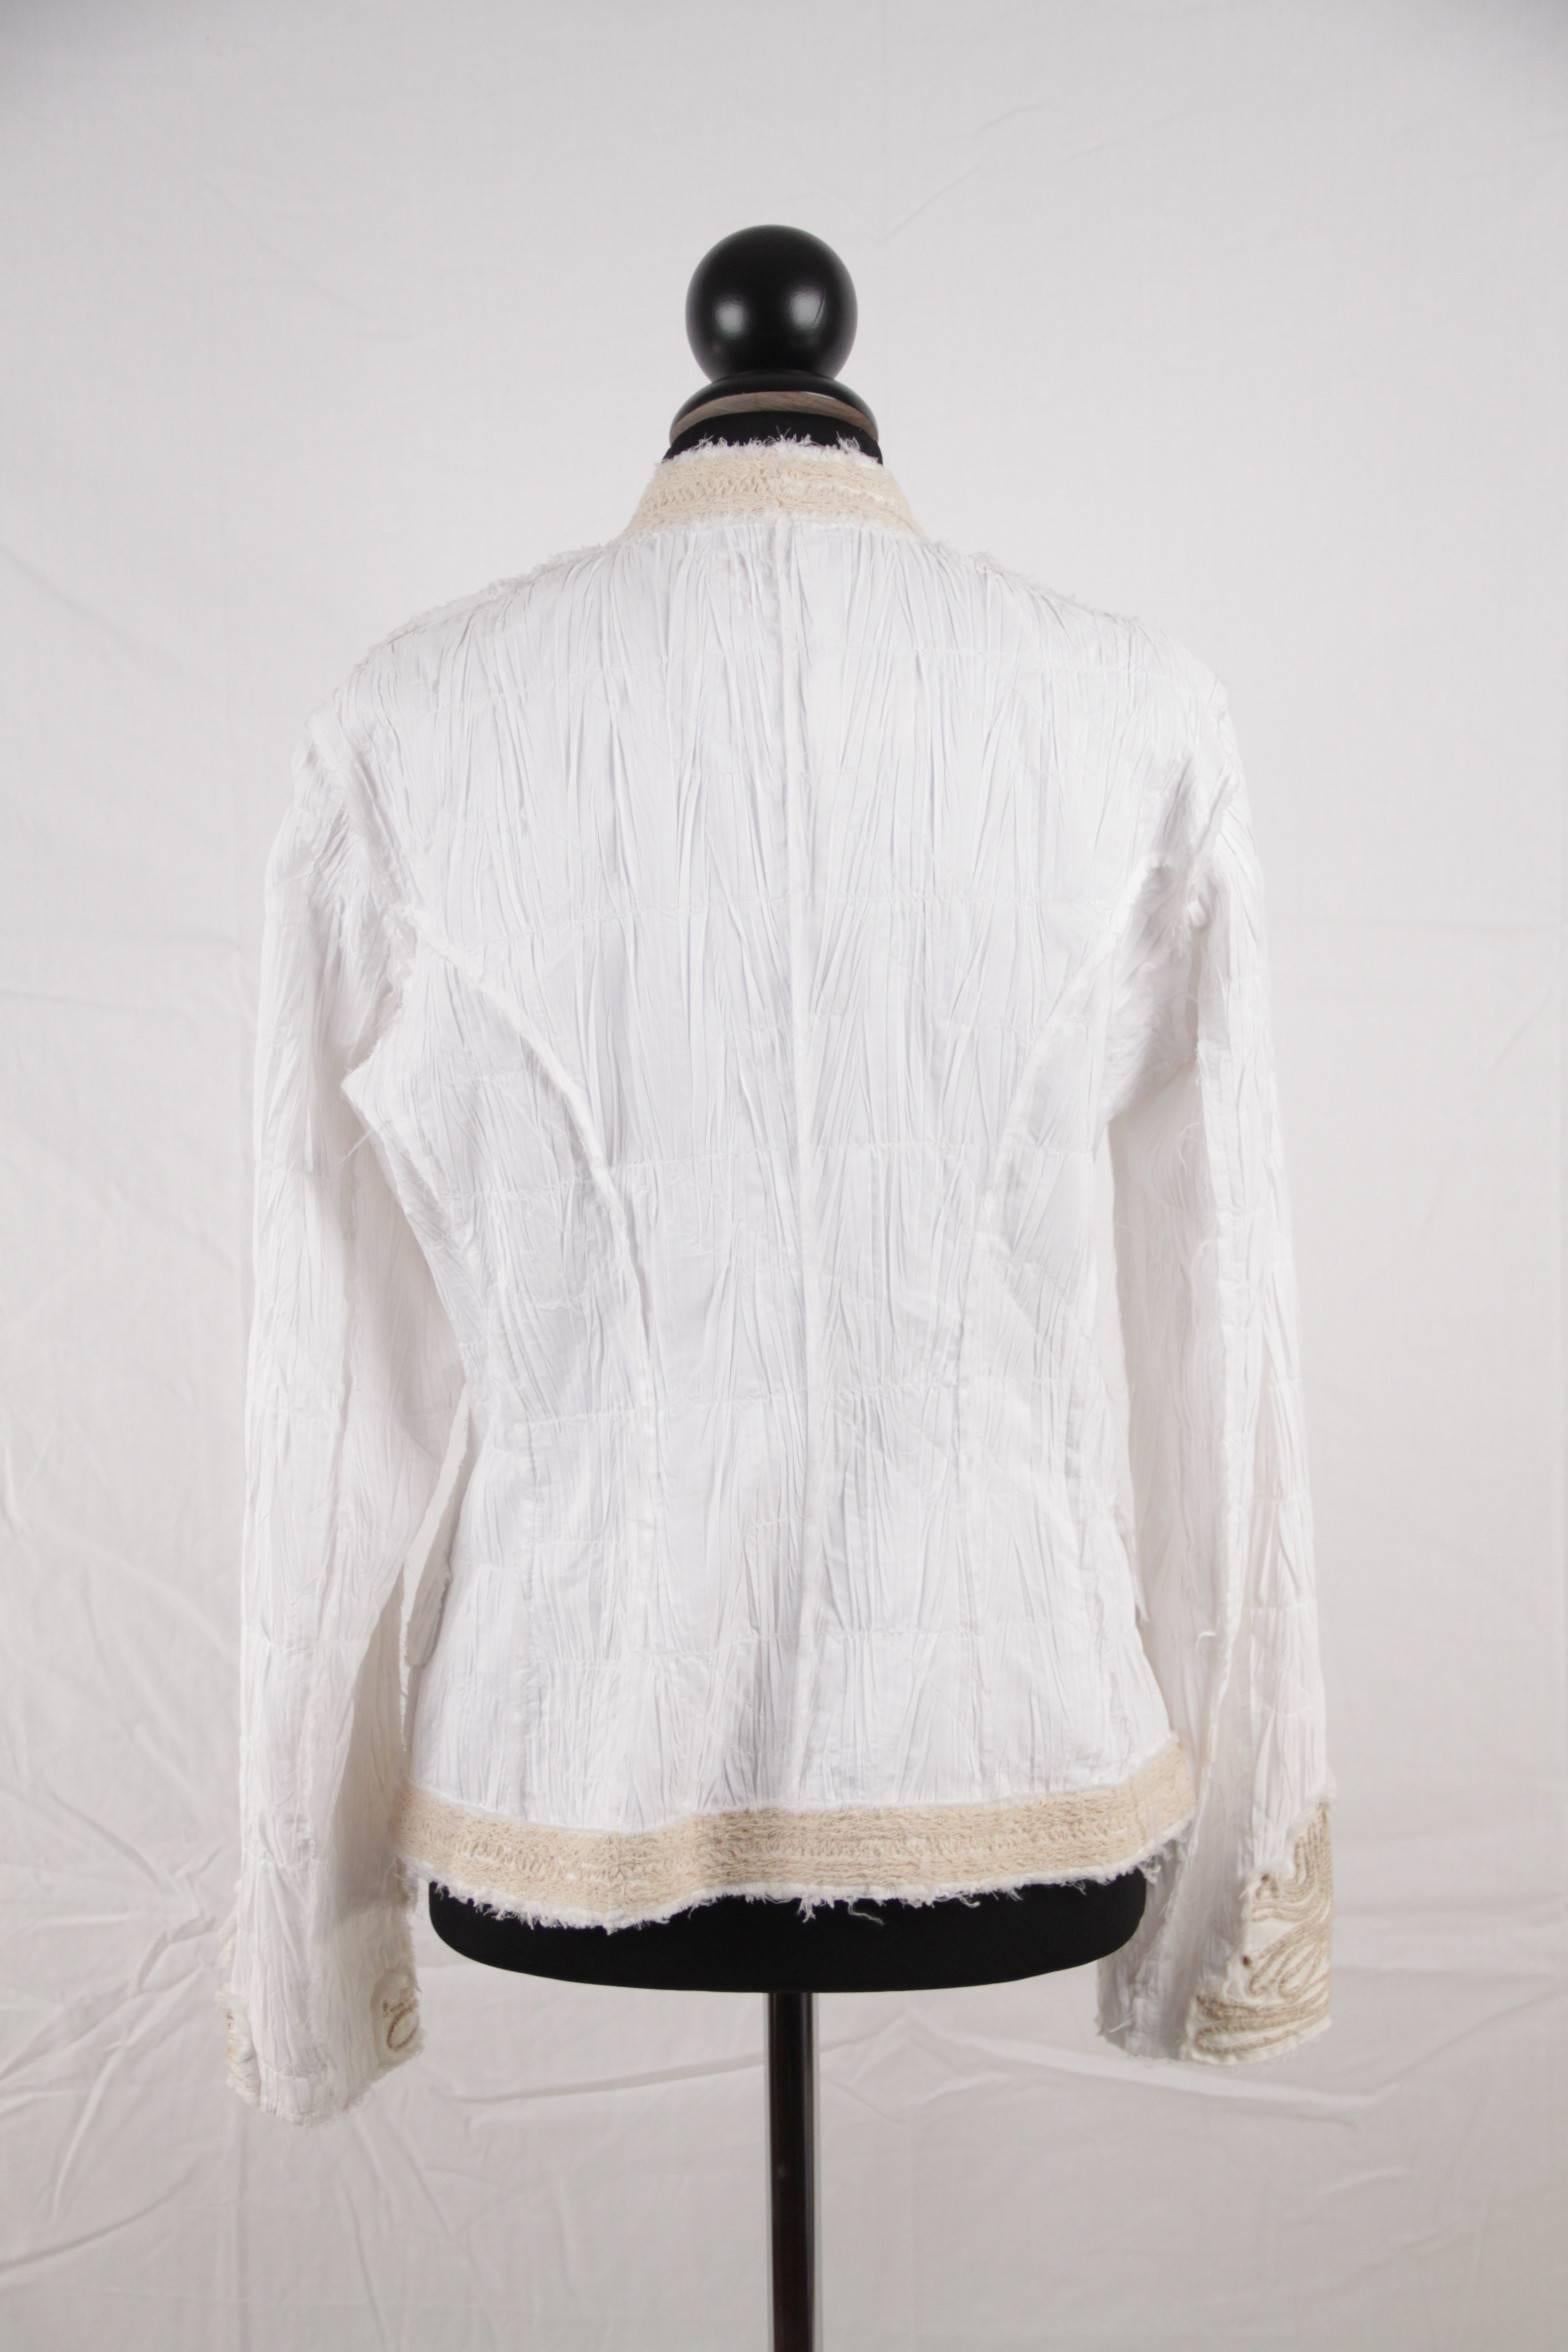 ERMANNO DAELLI White Crinckled COLLARLESS JACKET w/ Embroidery SIZE 44 2